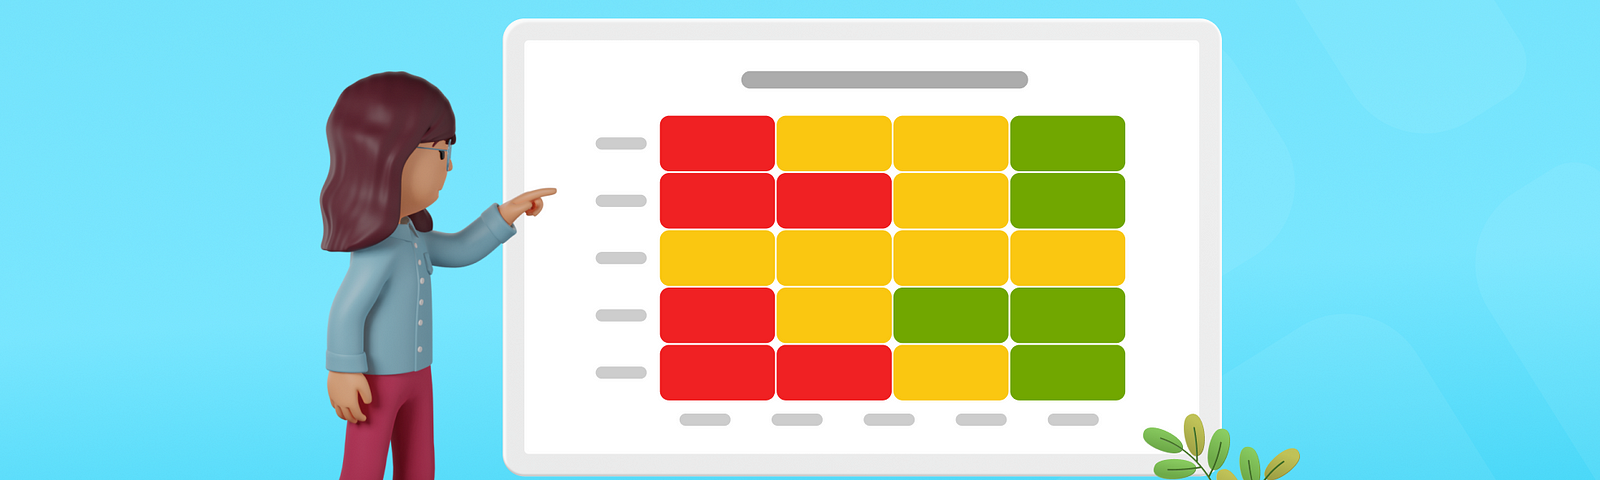 Cracking the code: Heatmap Visualizations for insights